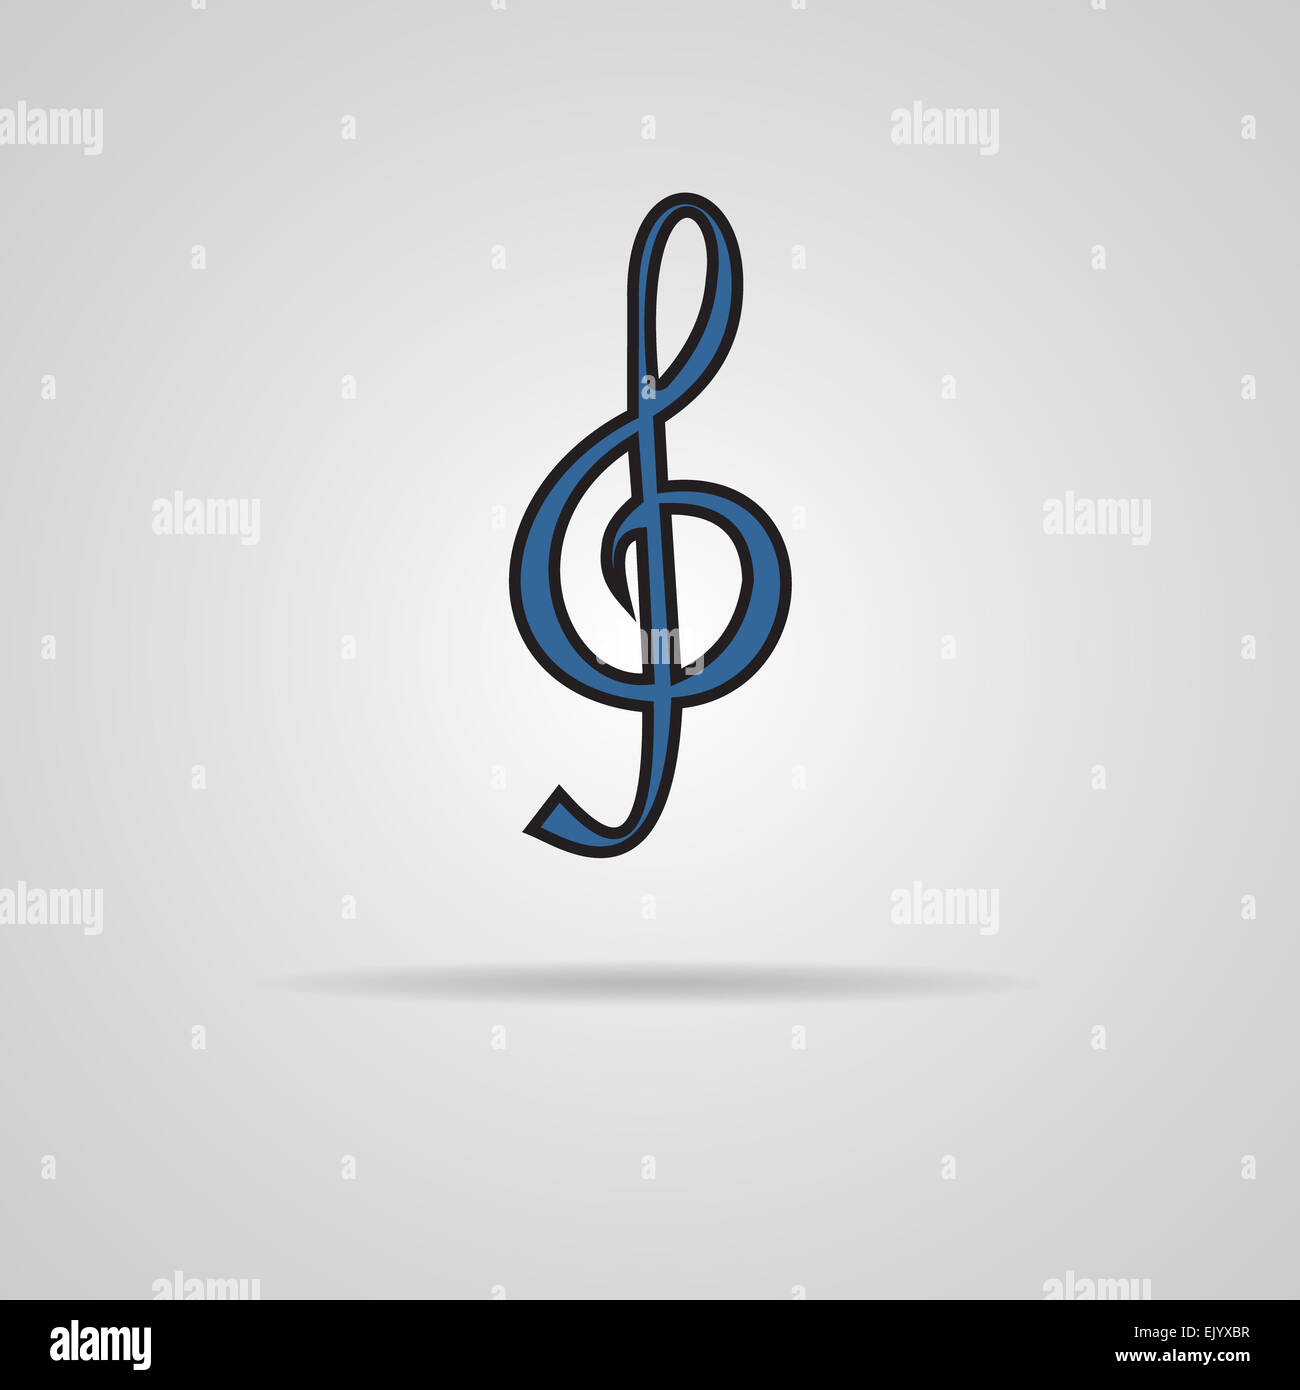 Illustration of a blue clef isolated on grey Stock Photo